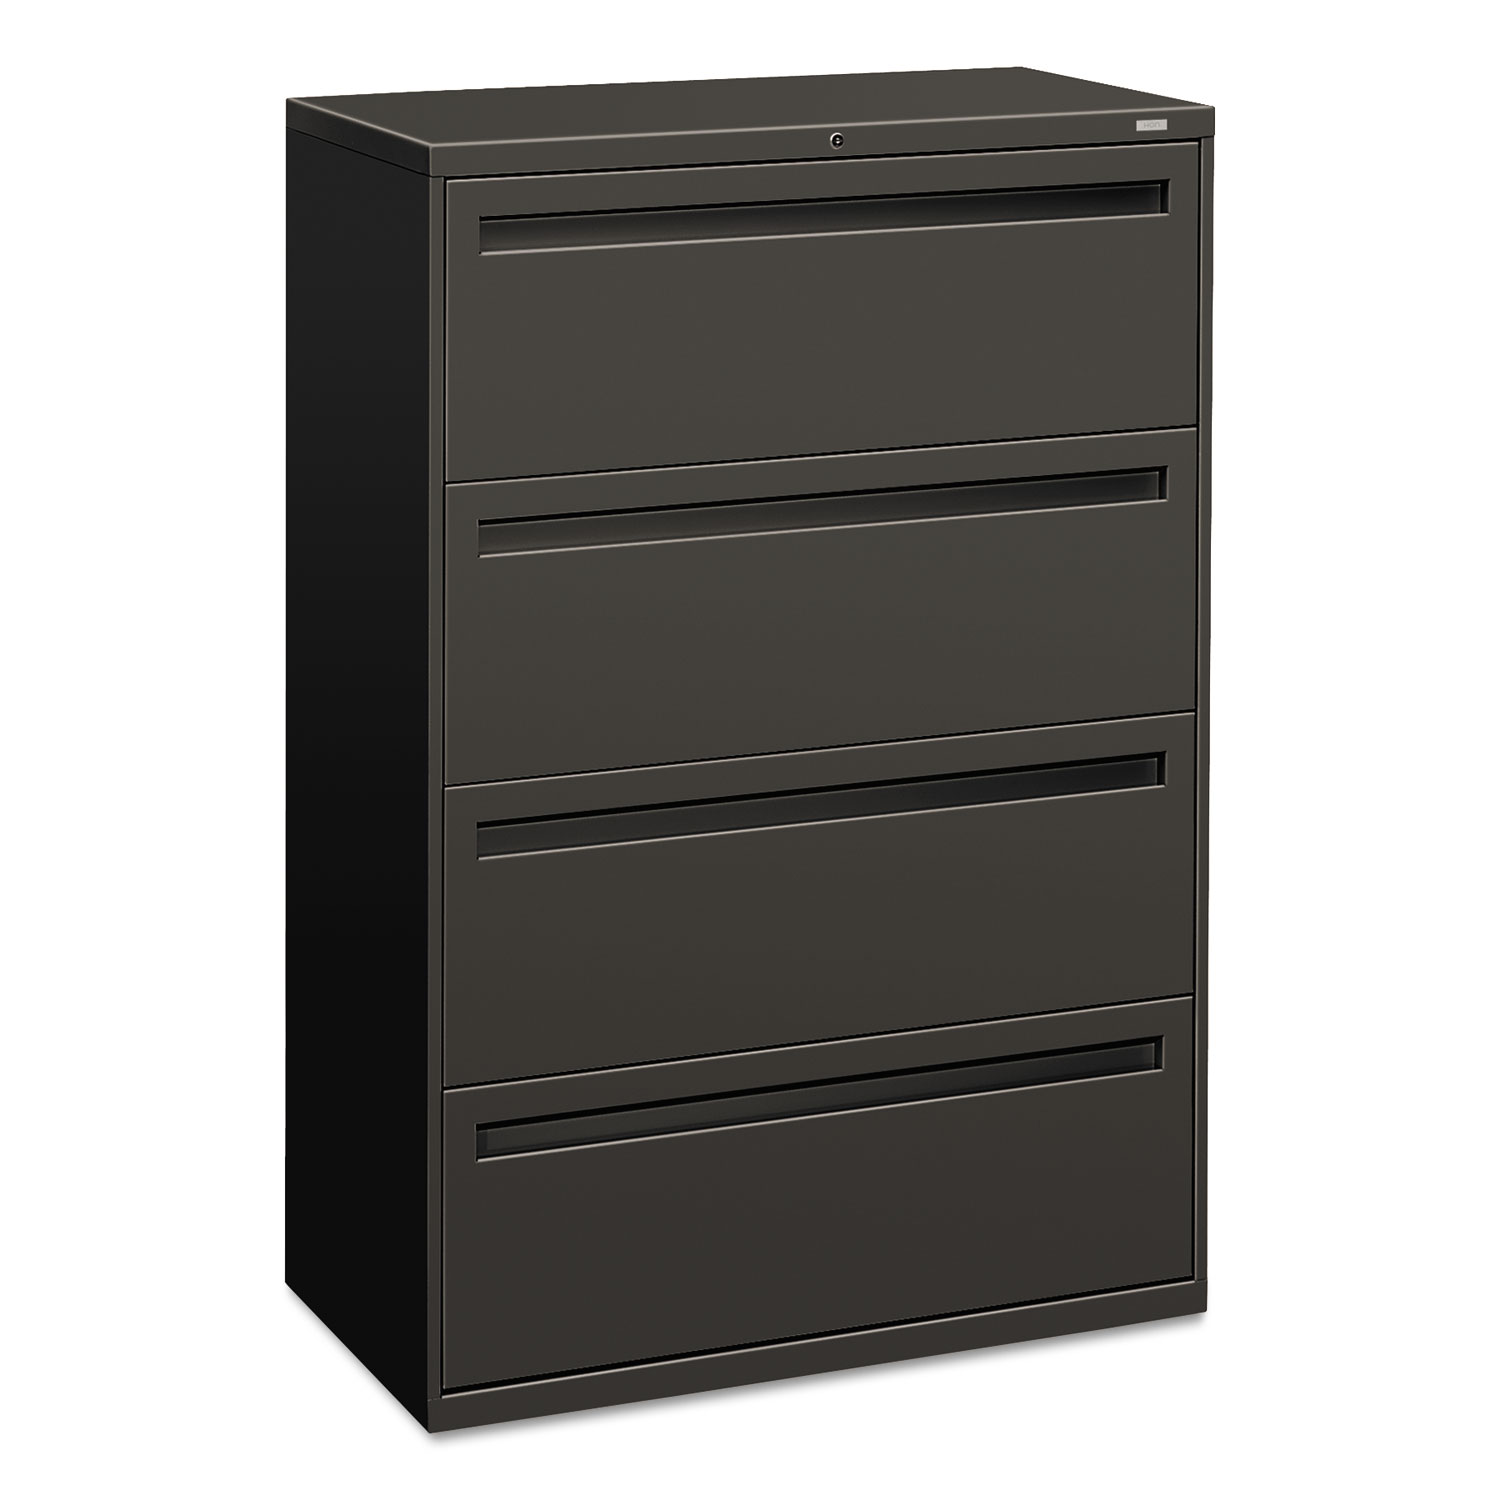 HON 700 Series Four-Drawer Lateral File, 36w x 19-1/4d, Charcoal